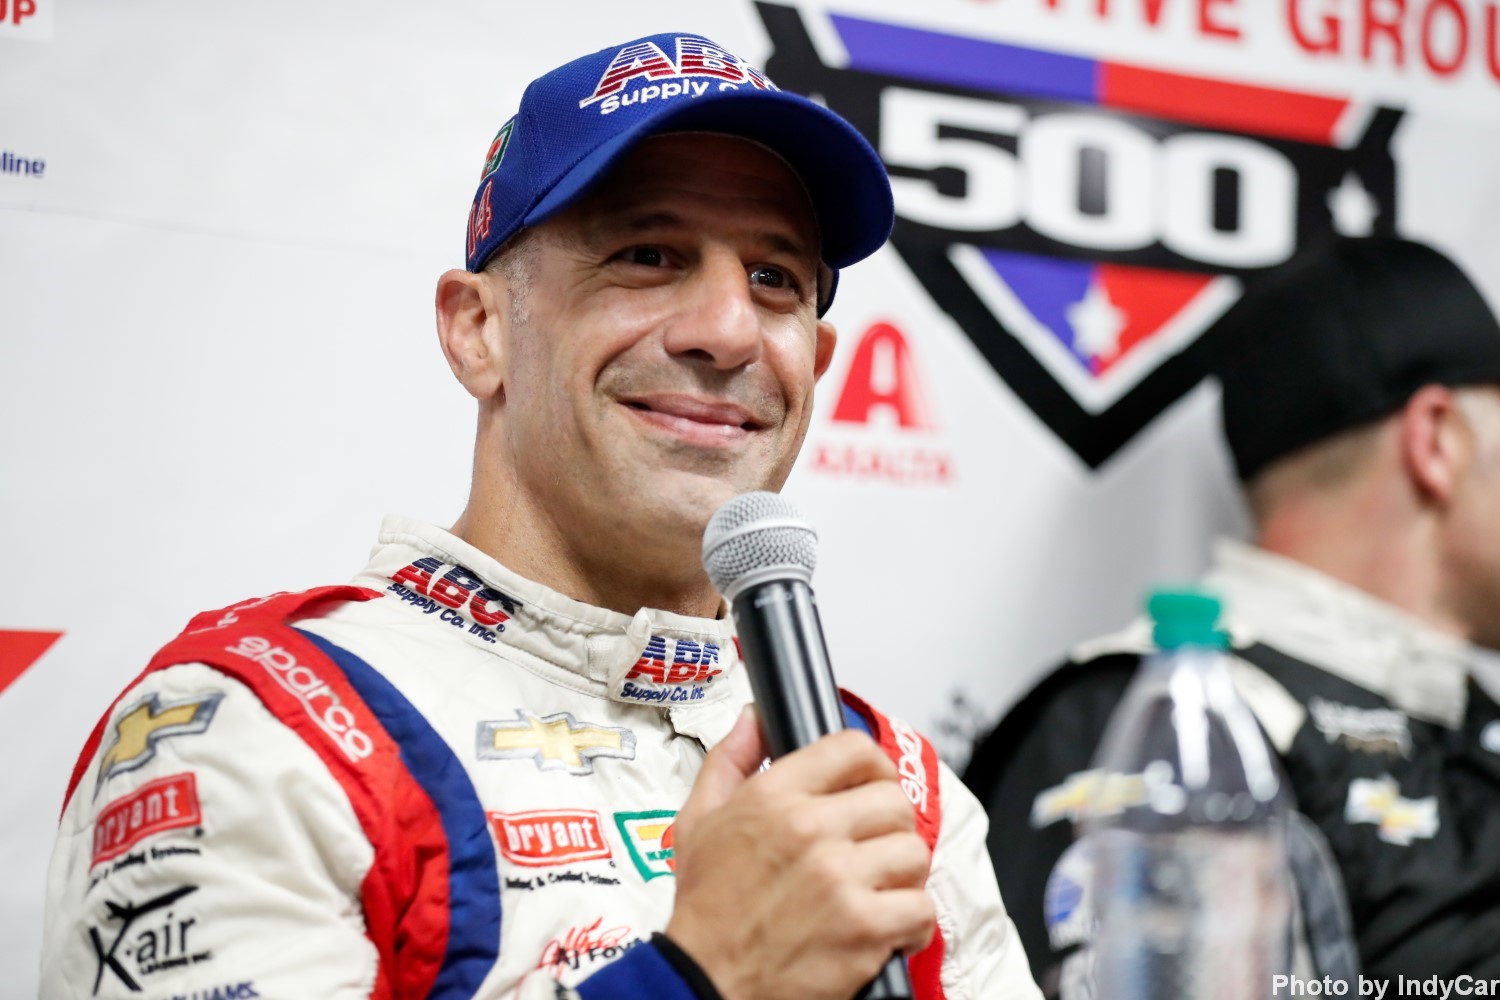 Kanaan shaves ugly beard, looks 10 years younger, gets first podium in 4 year